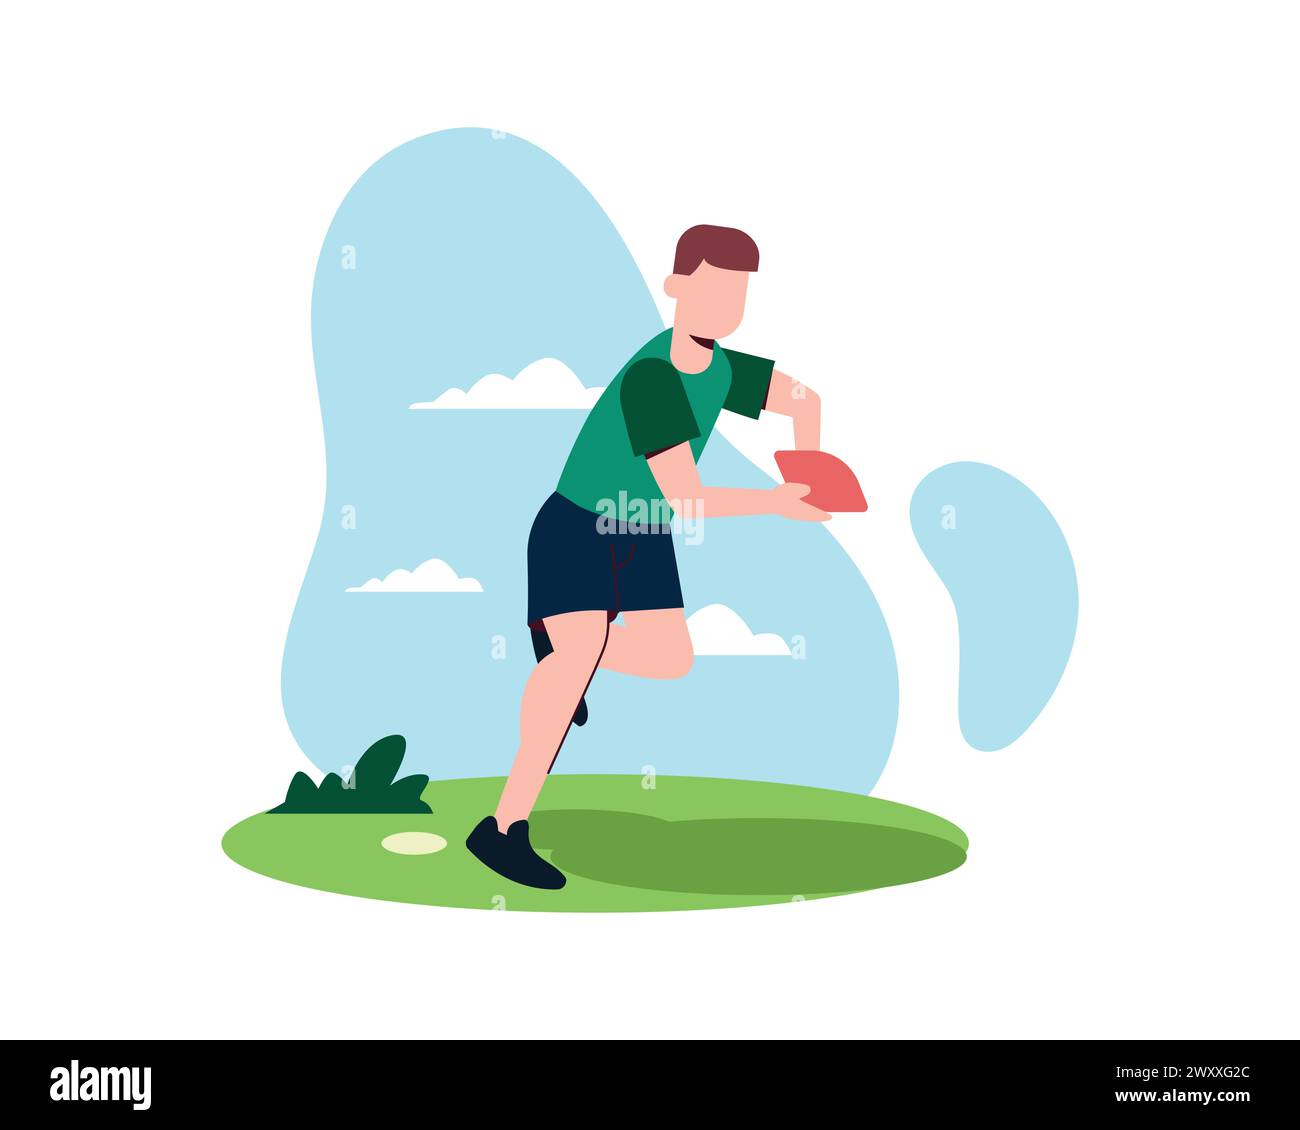 A man playing rugby outdoors, holding ball and running on field. Vector illustration for sport, young rugby player, American football concept Stock Vector